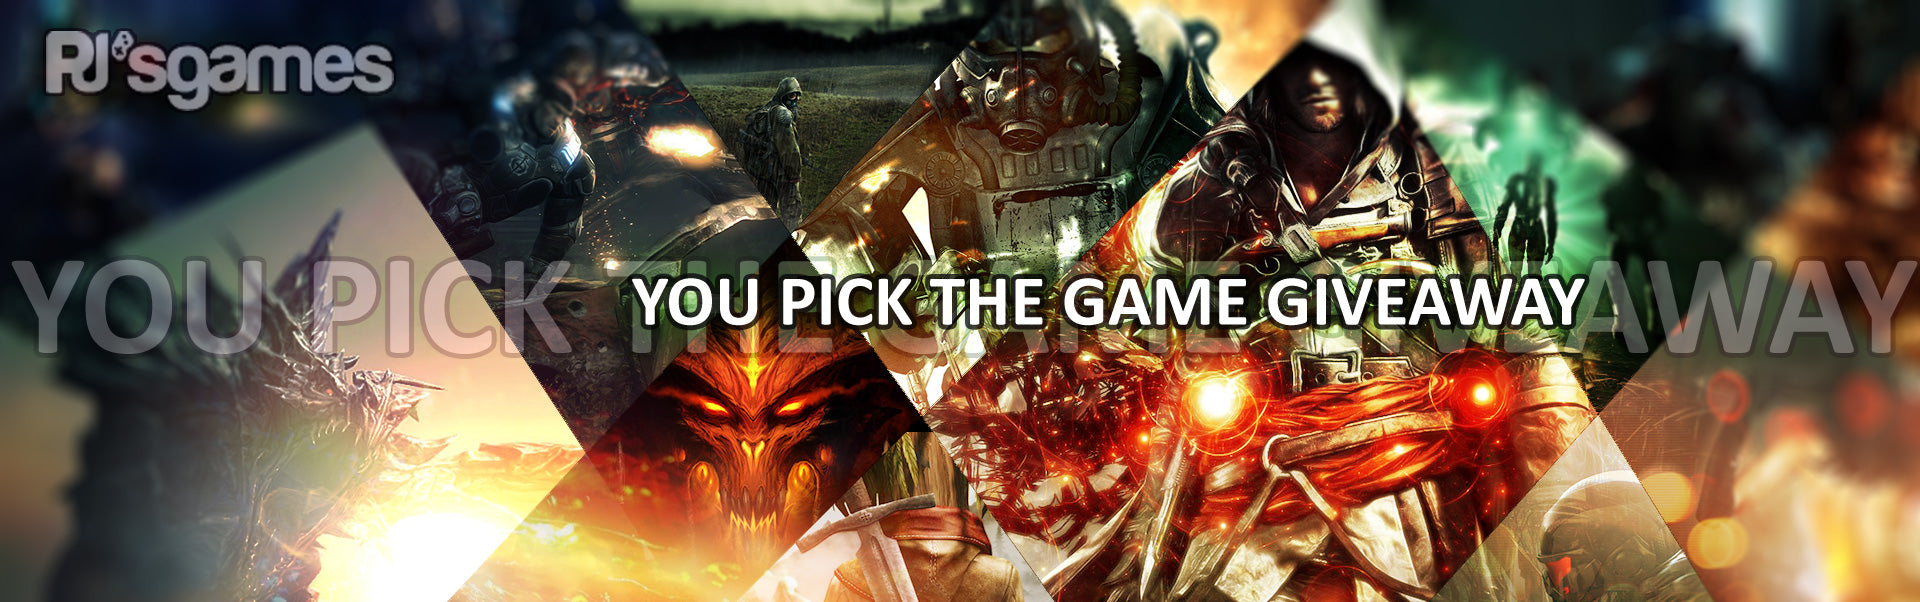 PJ's Games "You Pick The Game" Giveaway